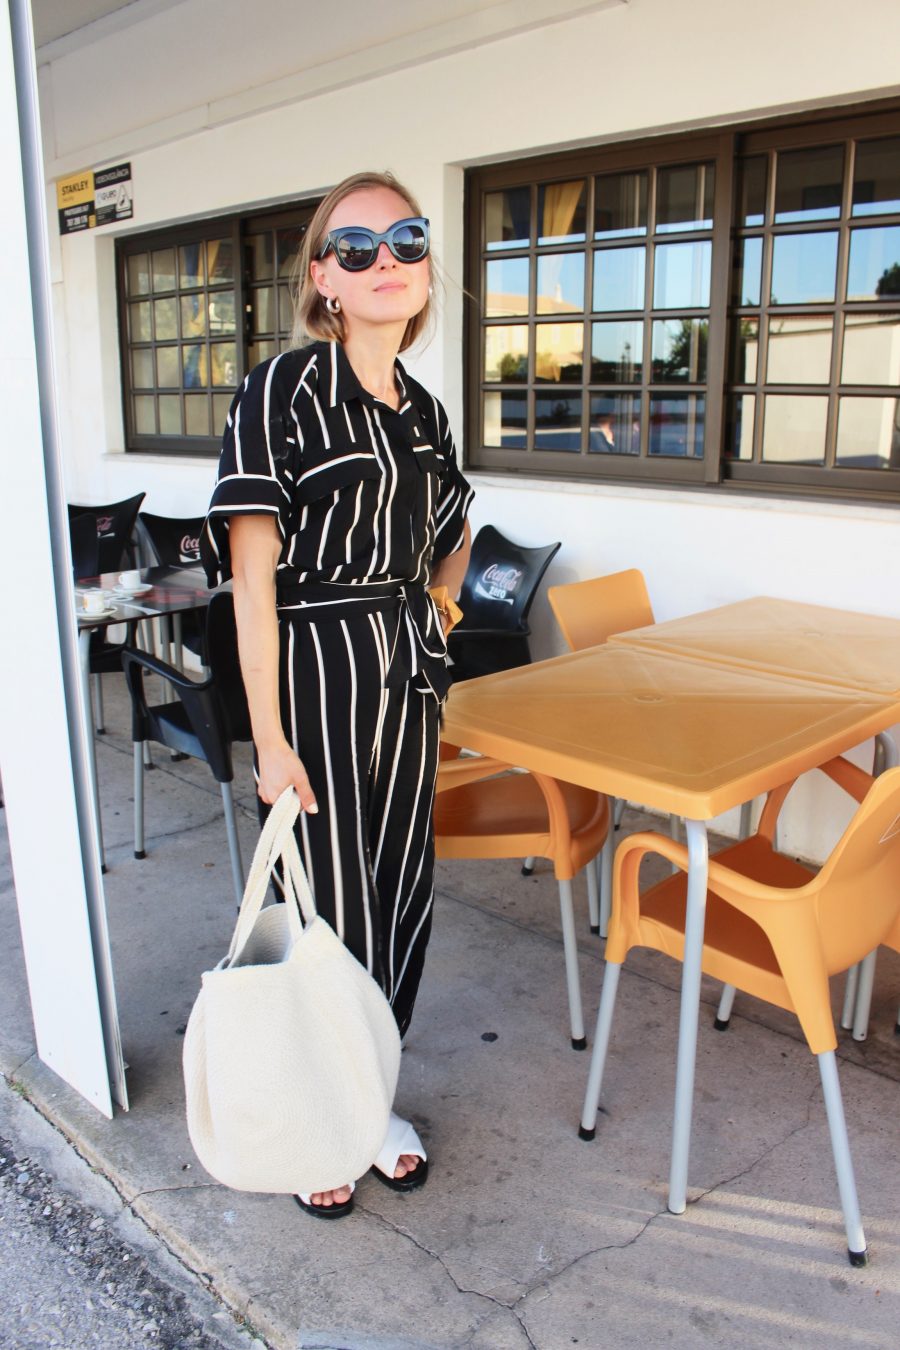 The Striped Jumpsuit H&M Trend